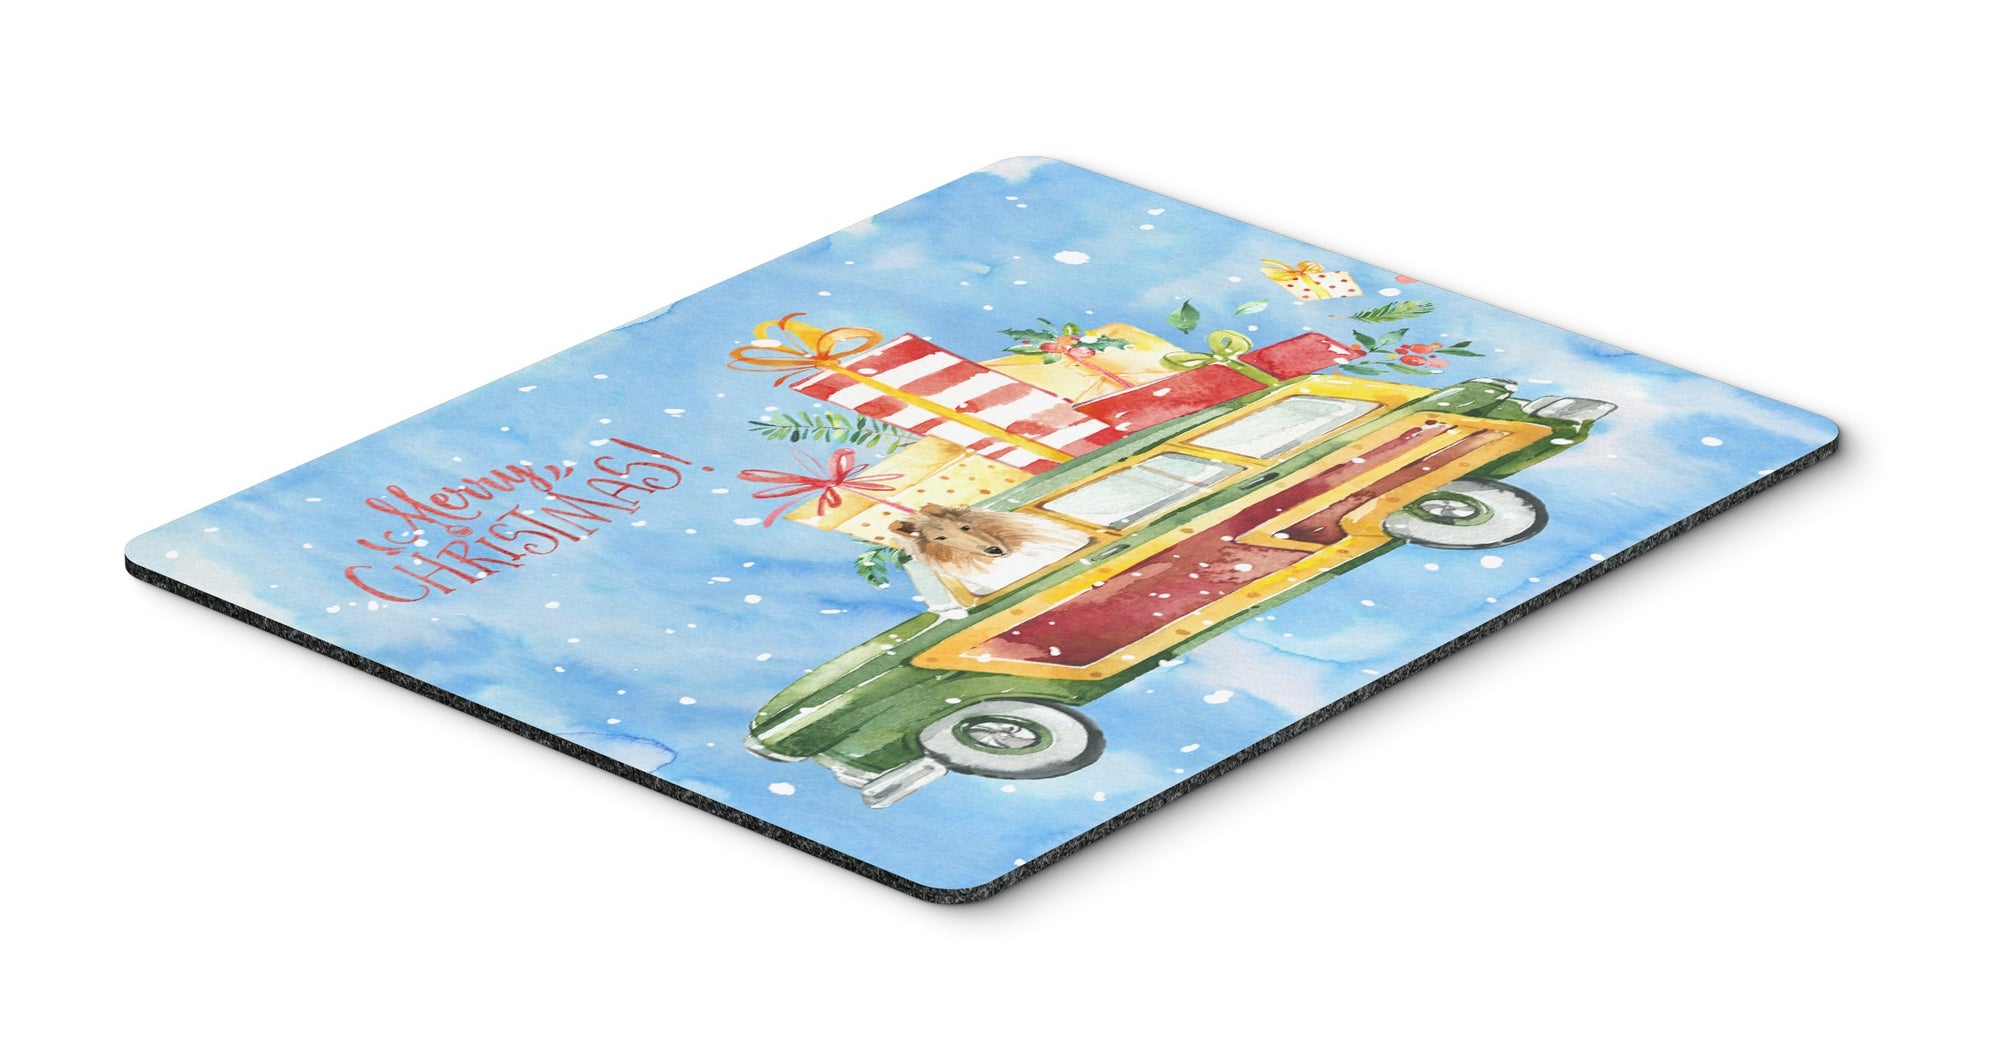 Merry Christmas Collie Mouse Pad, Hot Pad or Trivet CK2418MP by Caroline's Treasures